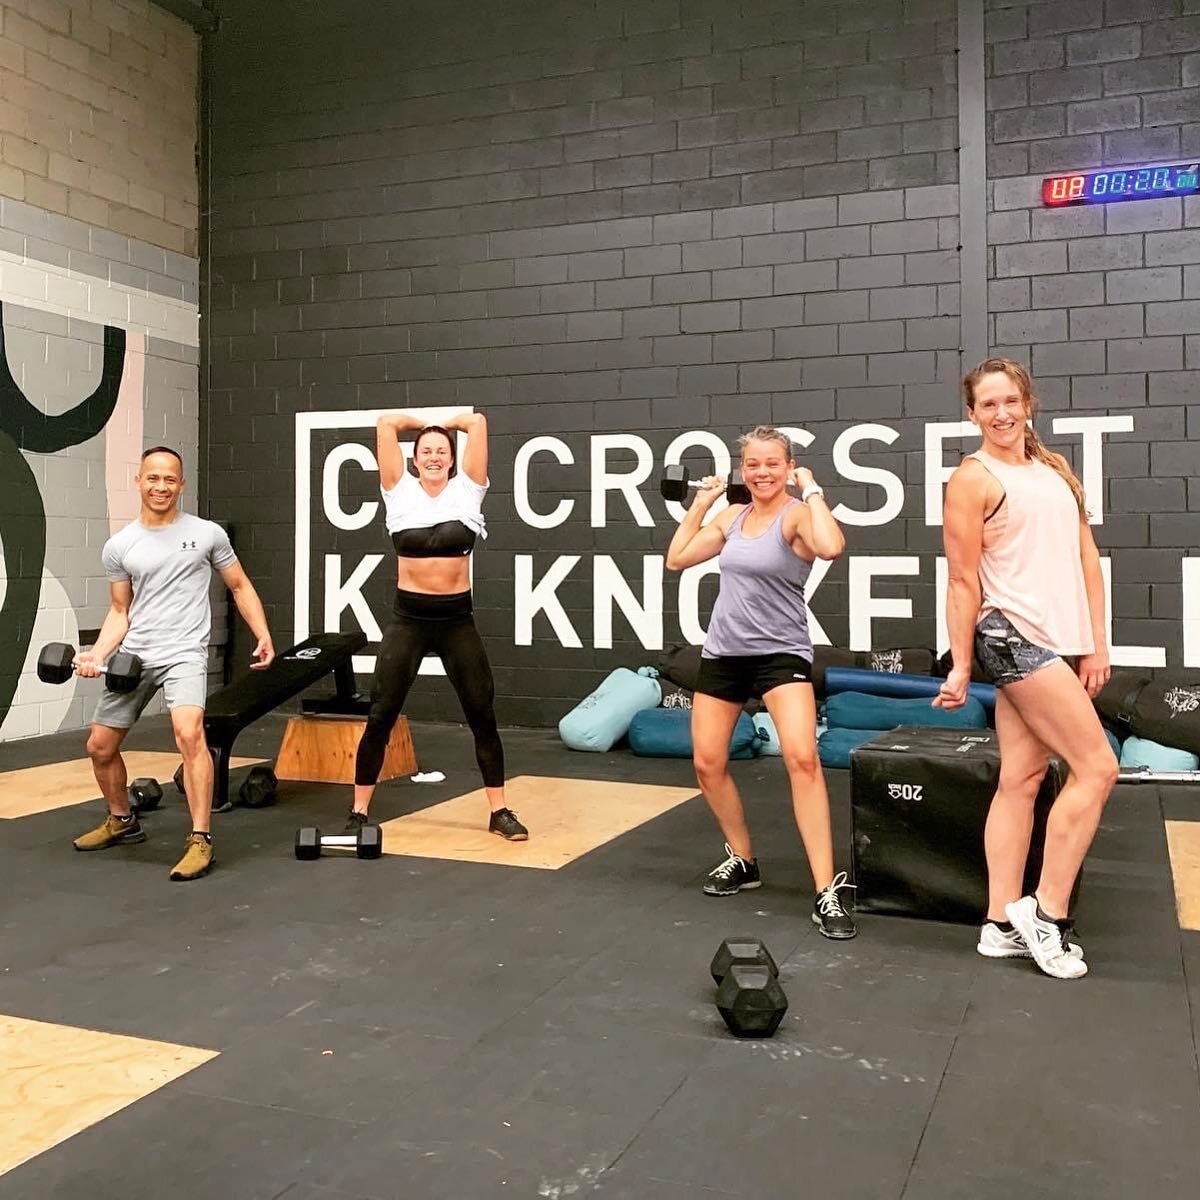 Sunday&rsquo;s at CFK! 😛🤙💙

#CFK #CrossFit #fitfam